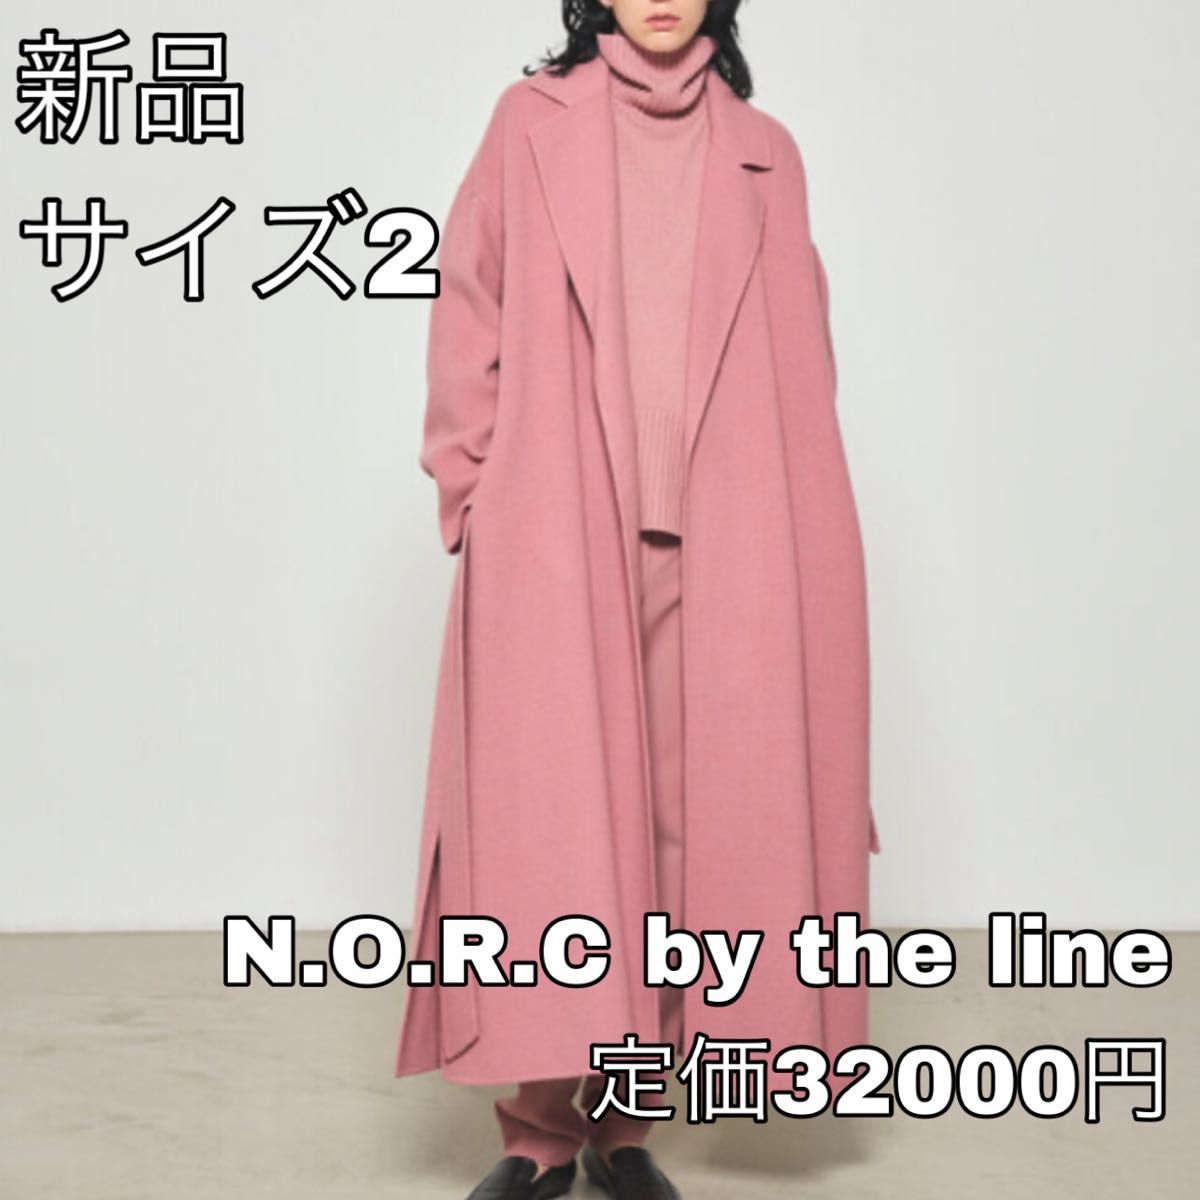 3047 N.O.R.C by the line ライトウールリバーロングコート 【安心の